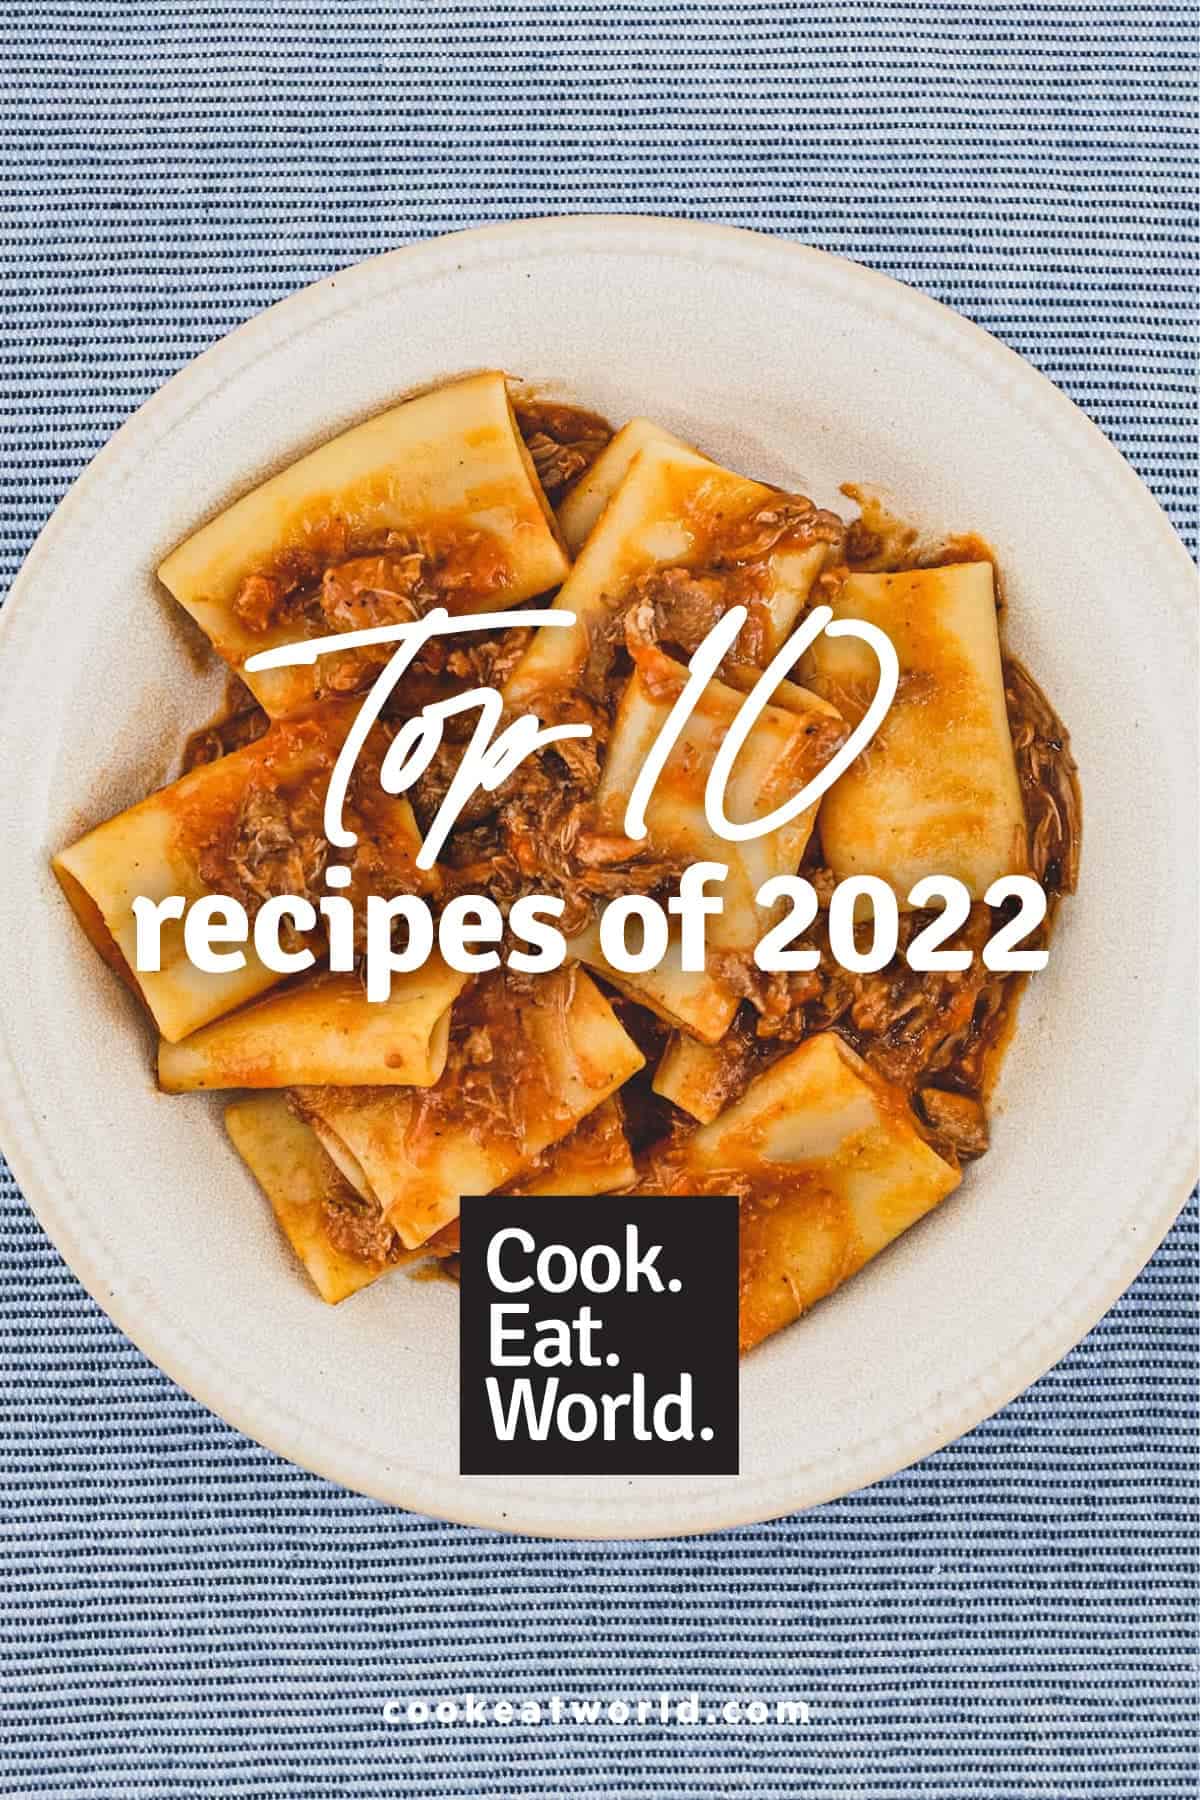 The top 10 recipes of 2022 | cookeatworld.com